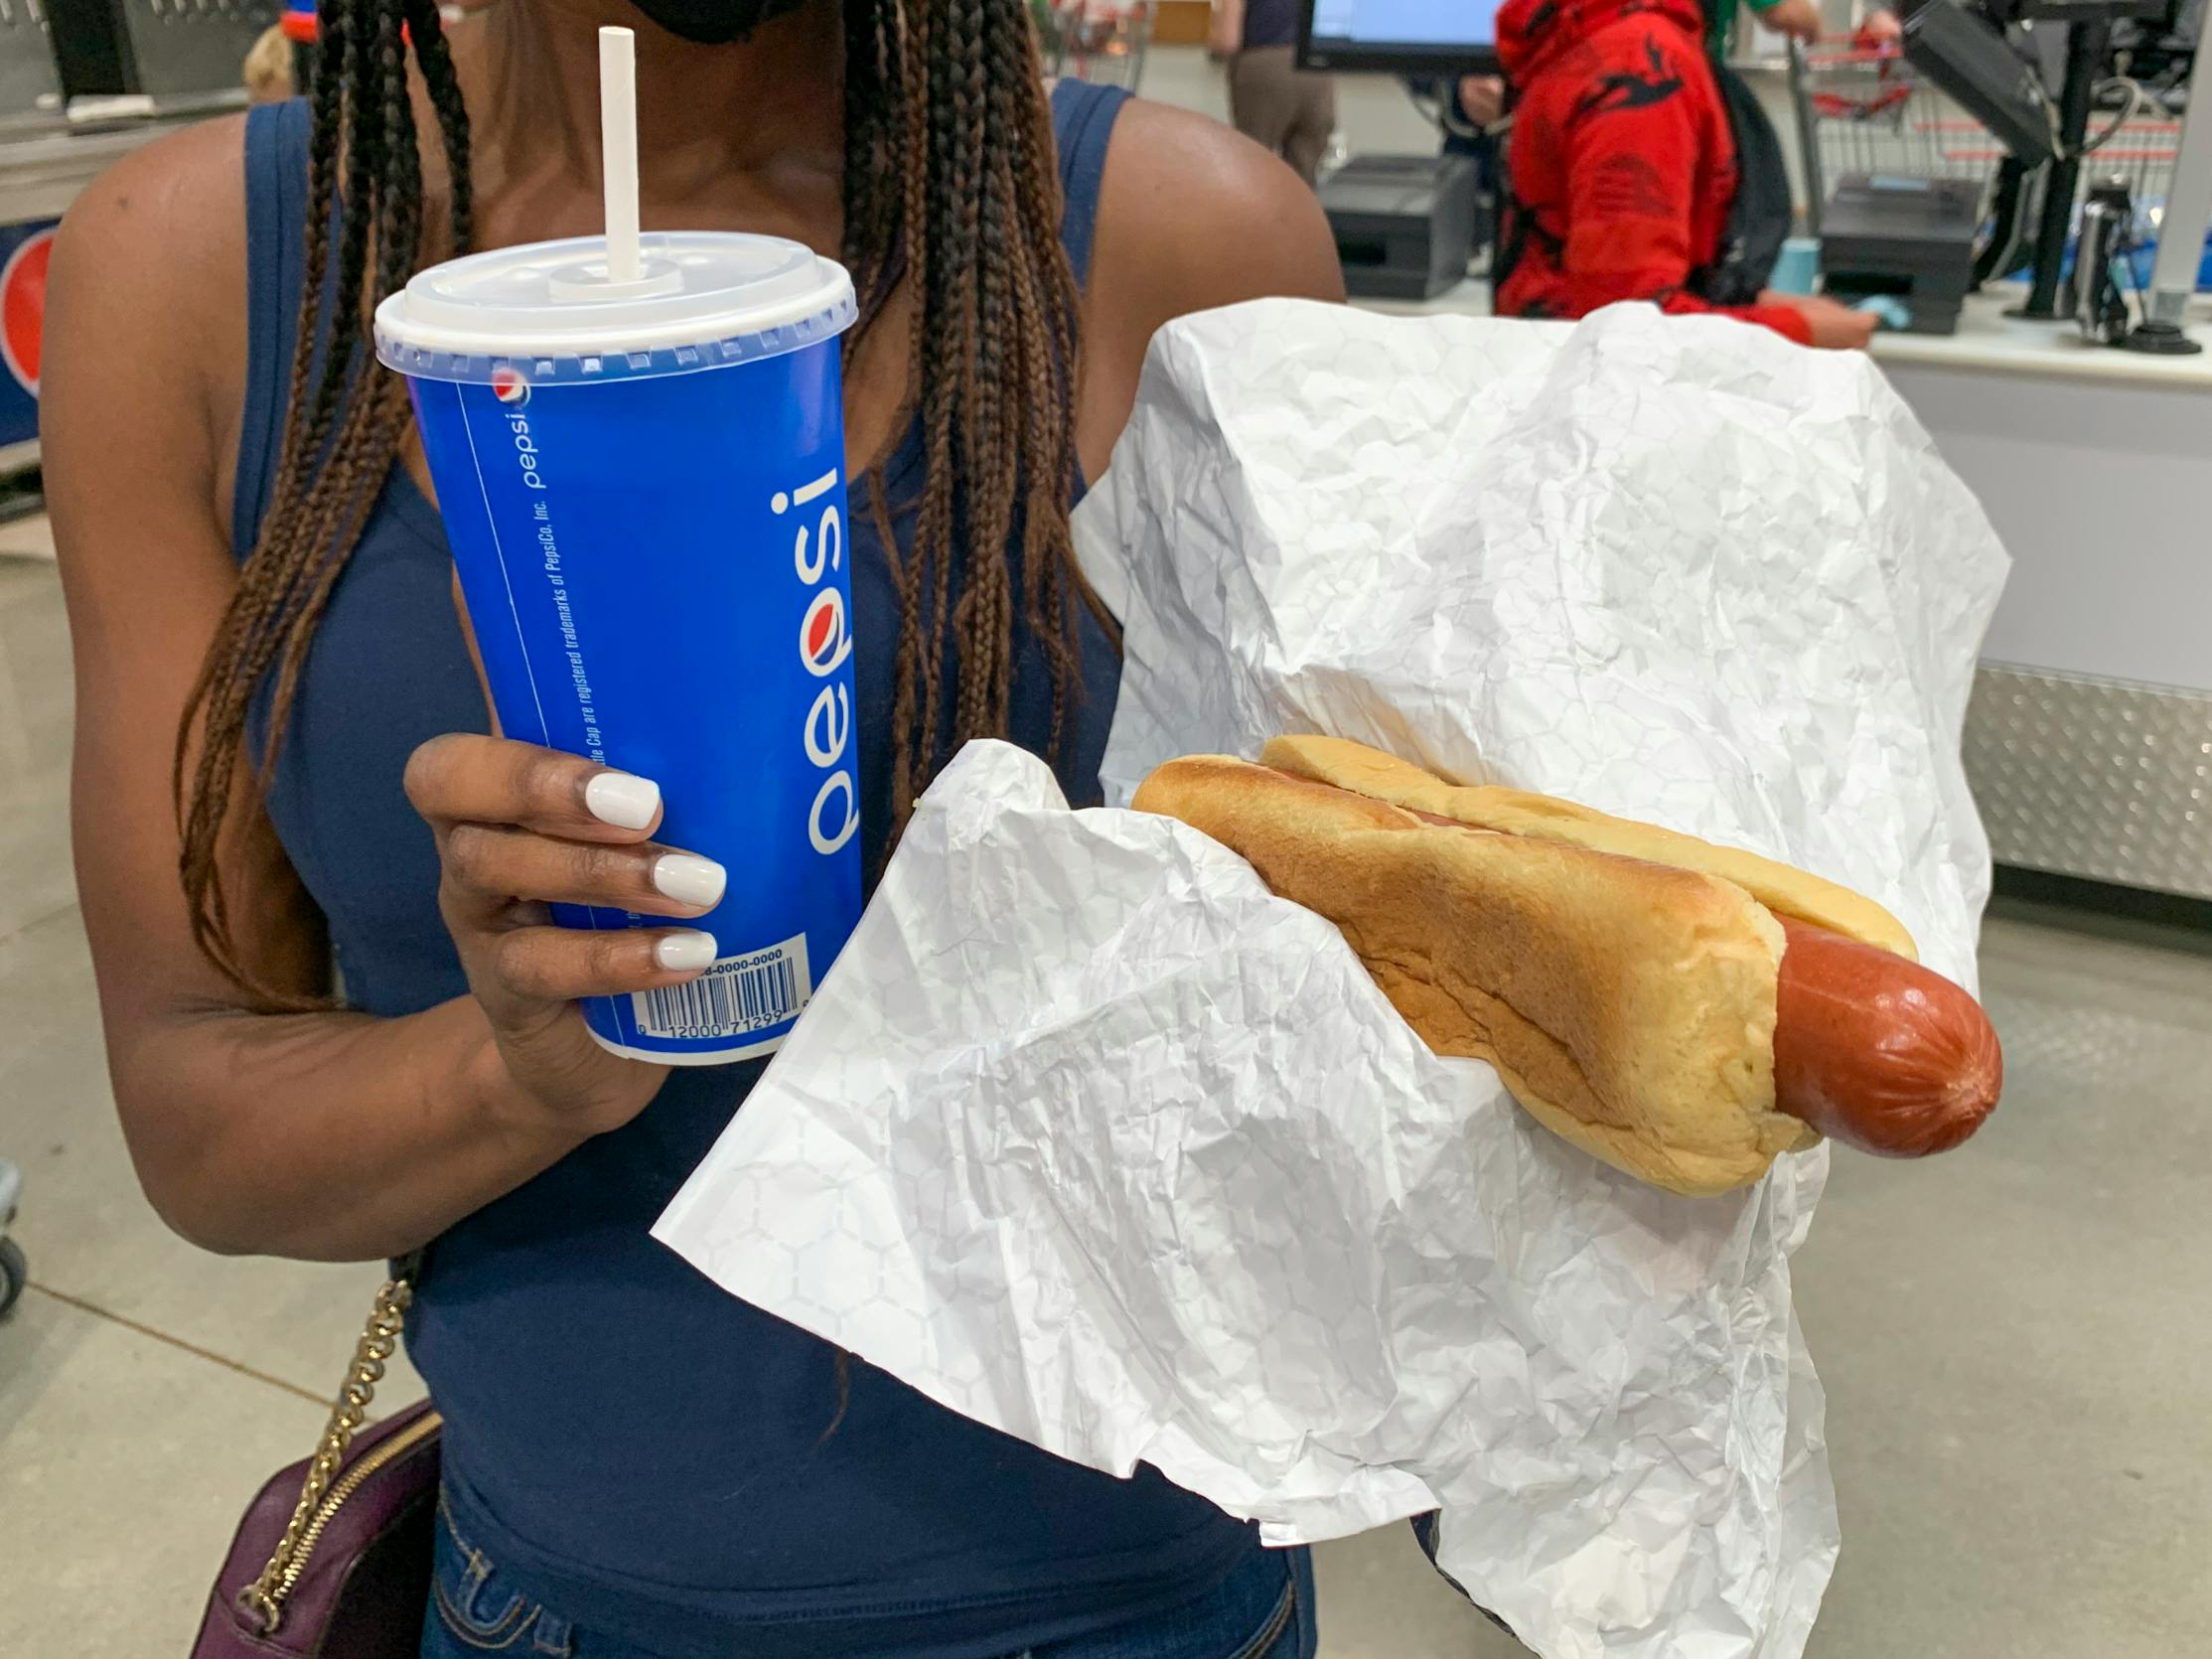 A woman holding a beverage cup and a hotdog near the Costco food court.